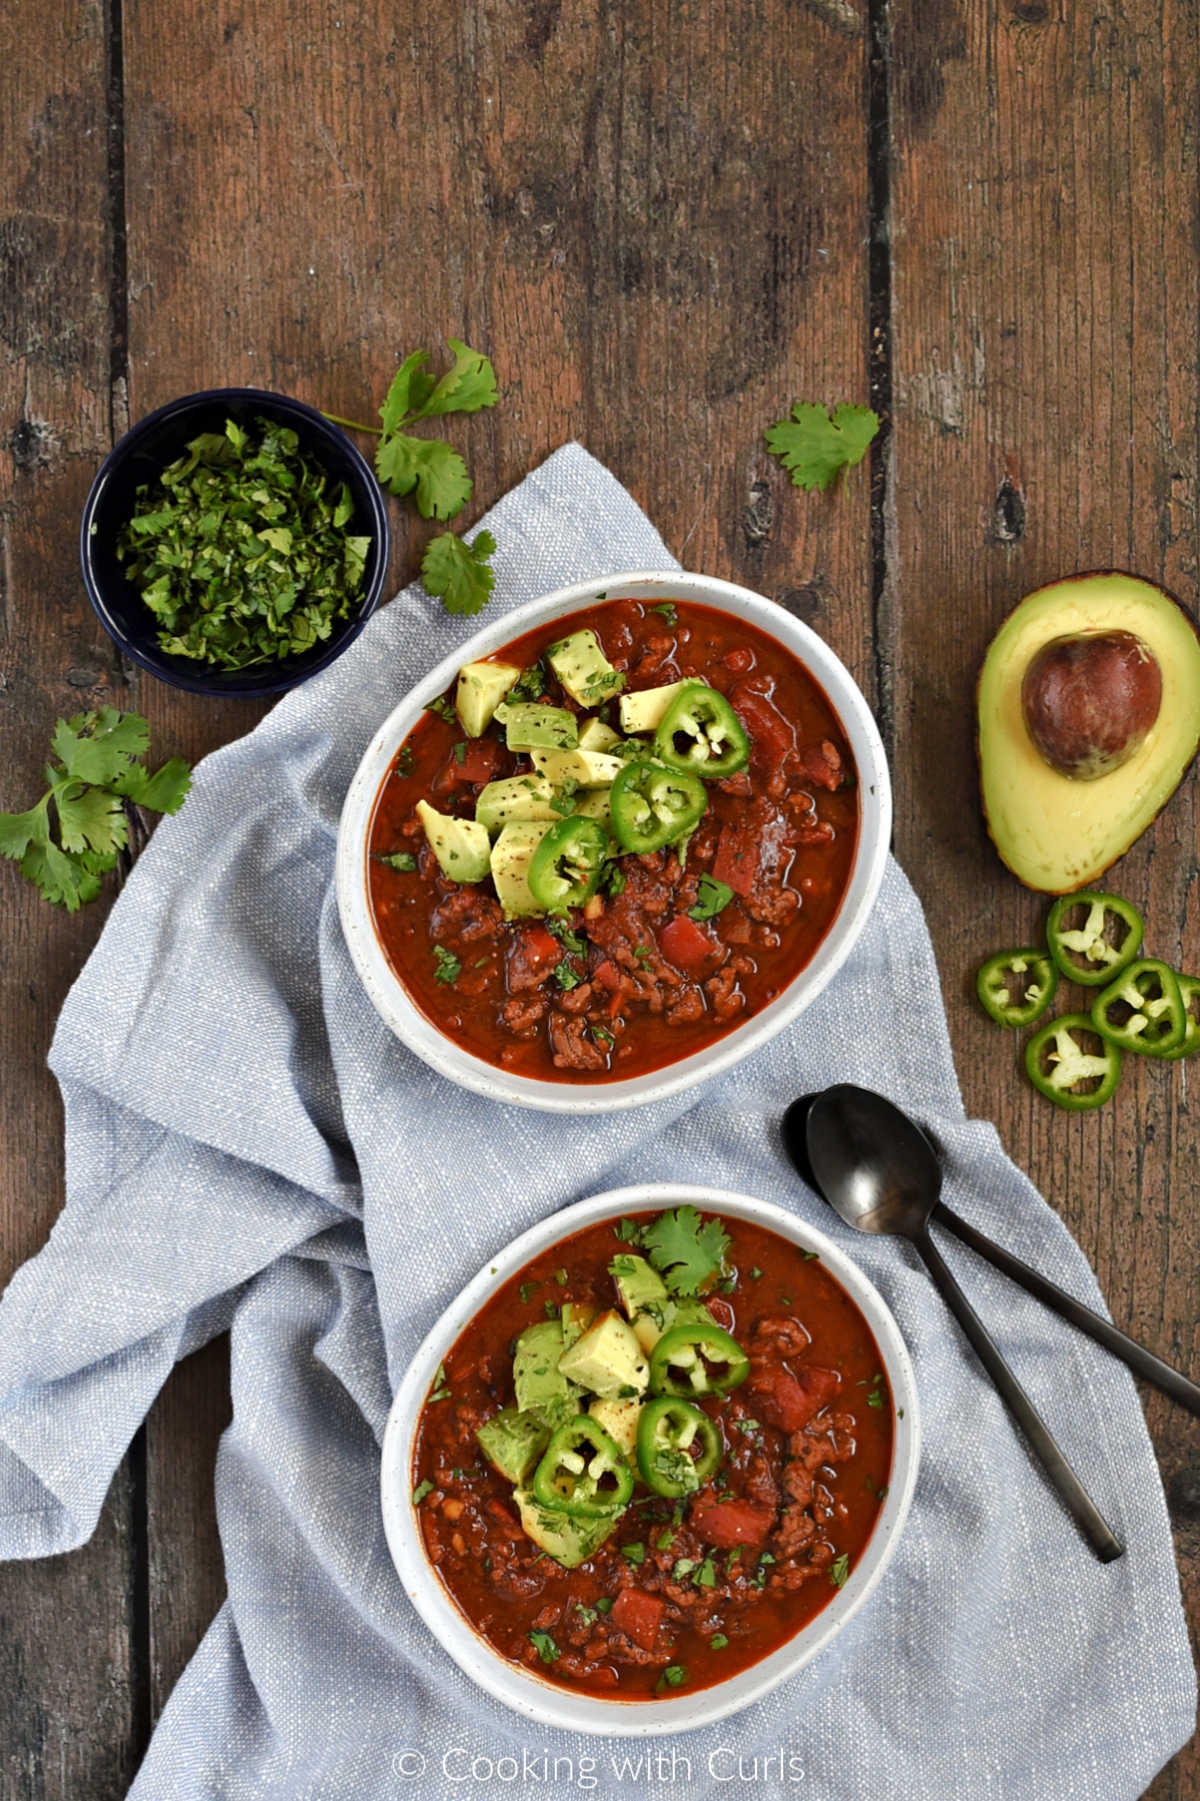 Looking down on two bowls of beanless chili topped with avocado and jalapeno slices.